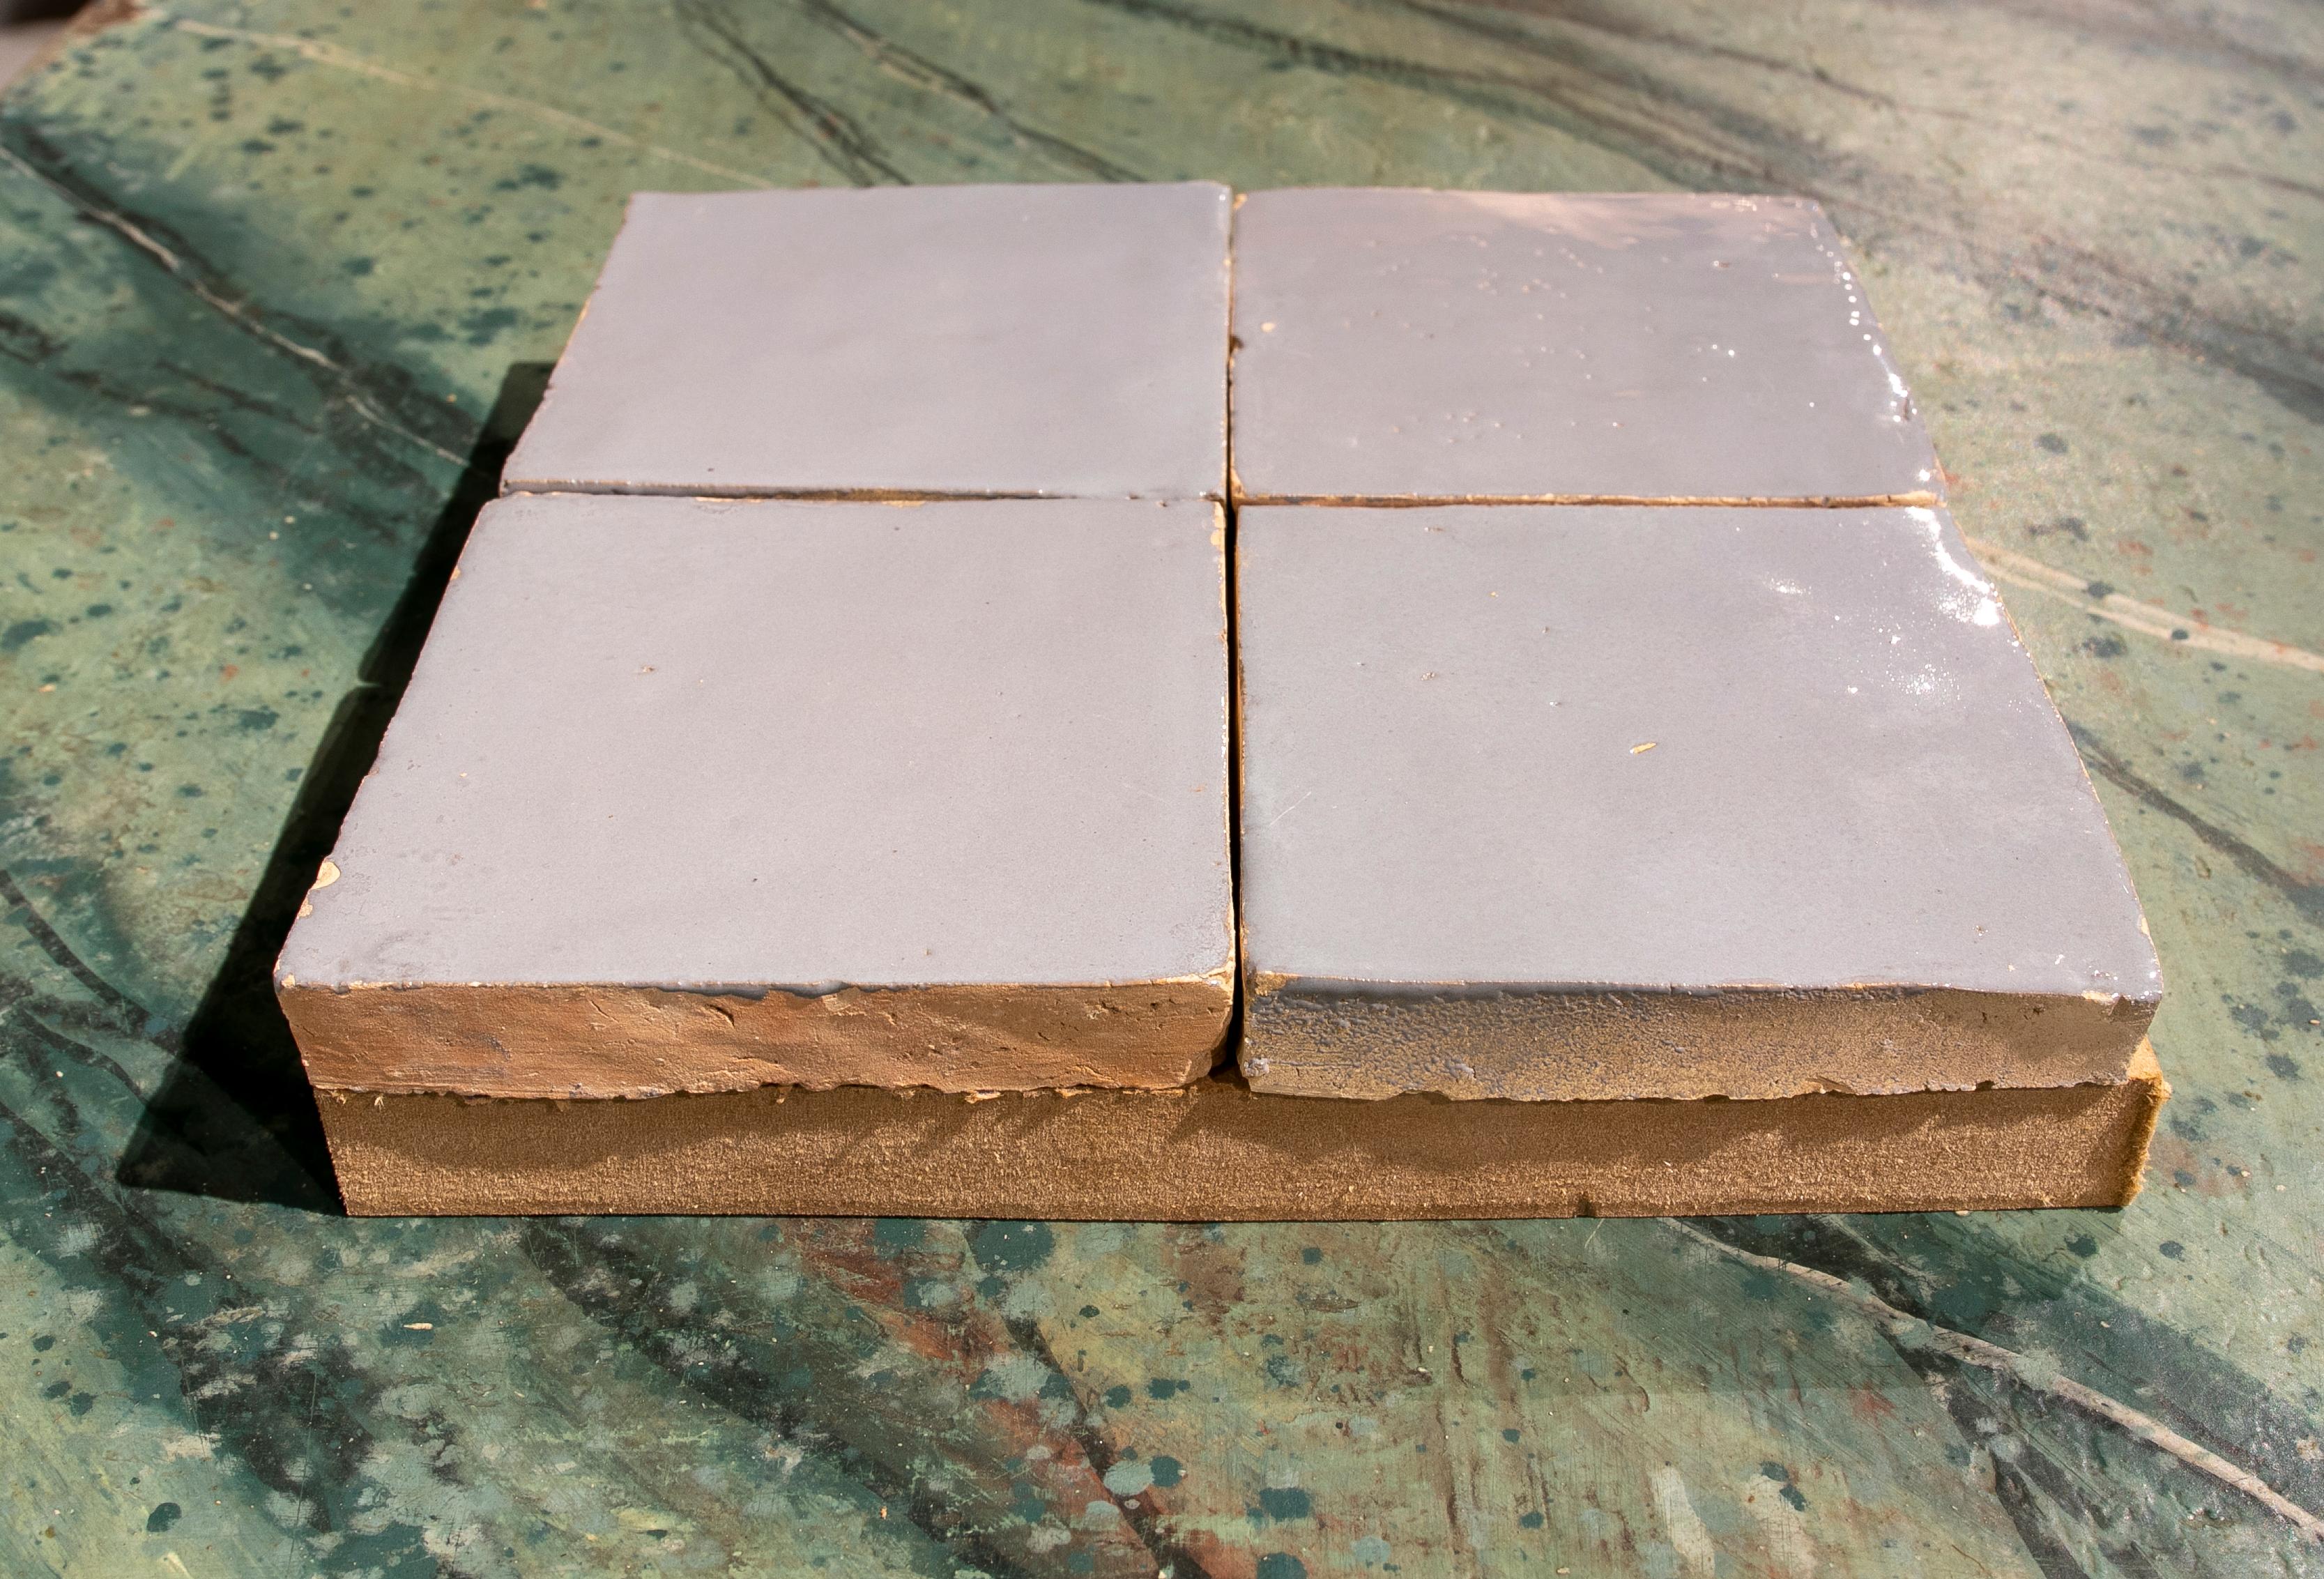 Handmade glazed zelige tile in grey colour in size 10x10 cm.

Price per M2 of 175 Euro, which corresponds to 100 tiles of 10x10 cm.